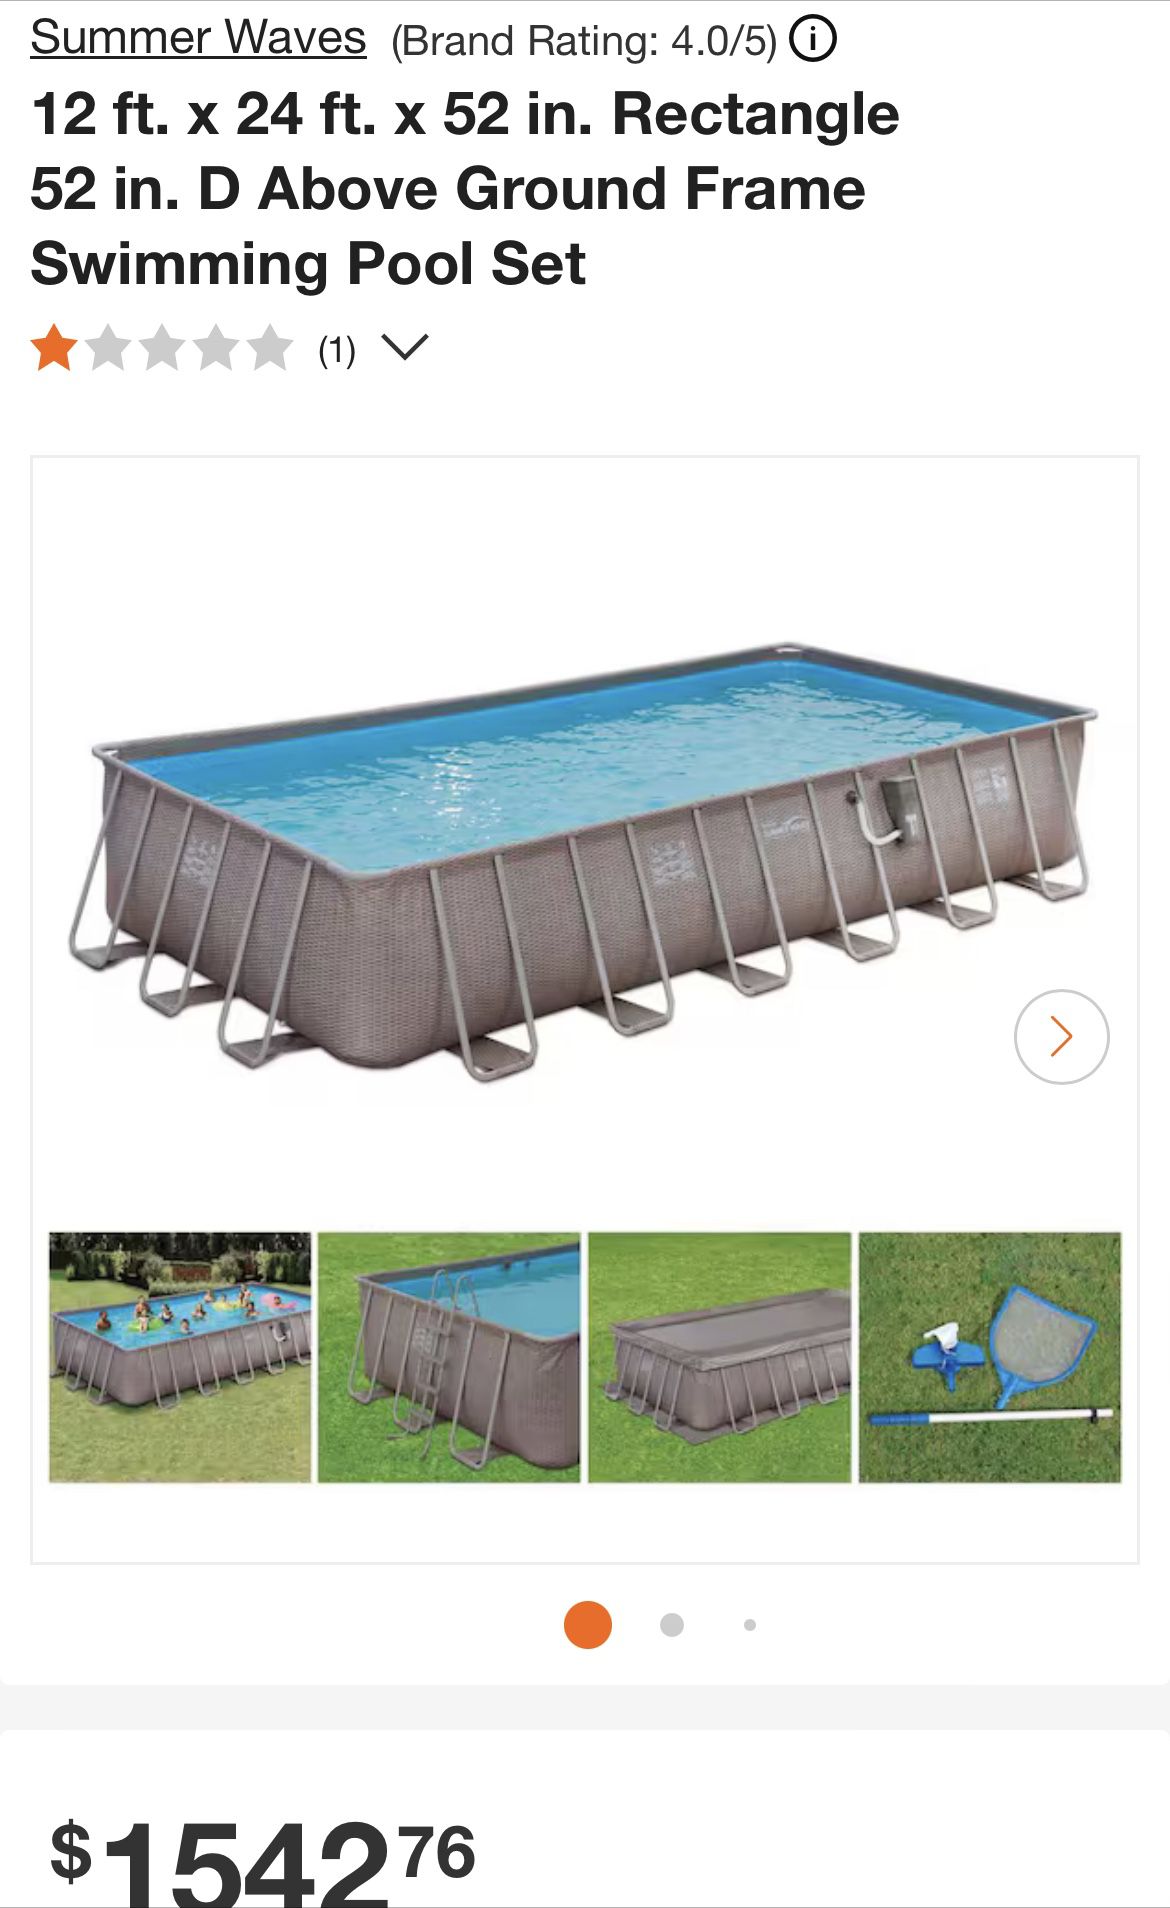 12 ft. x 24 ft. x 52 in. Rectangle 52 in. D Above Ground Frame Swimming Pool Set